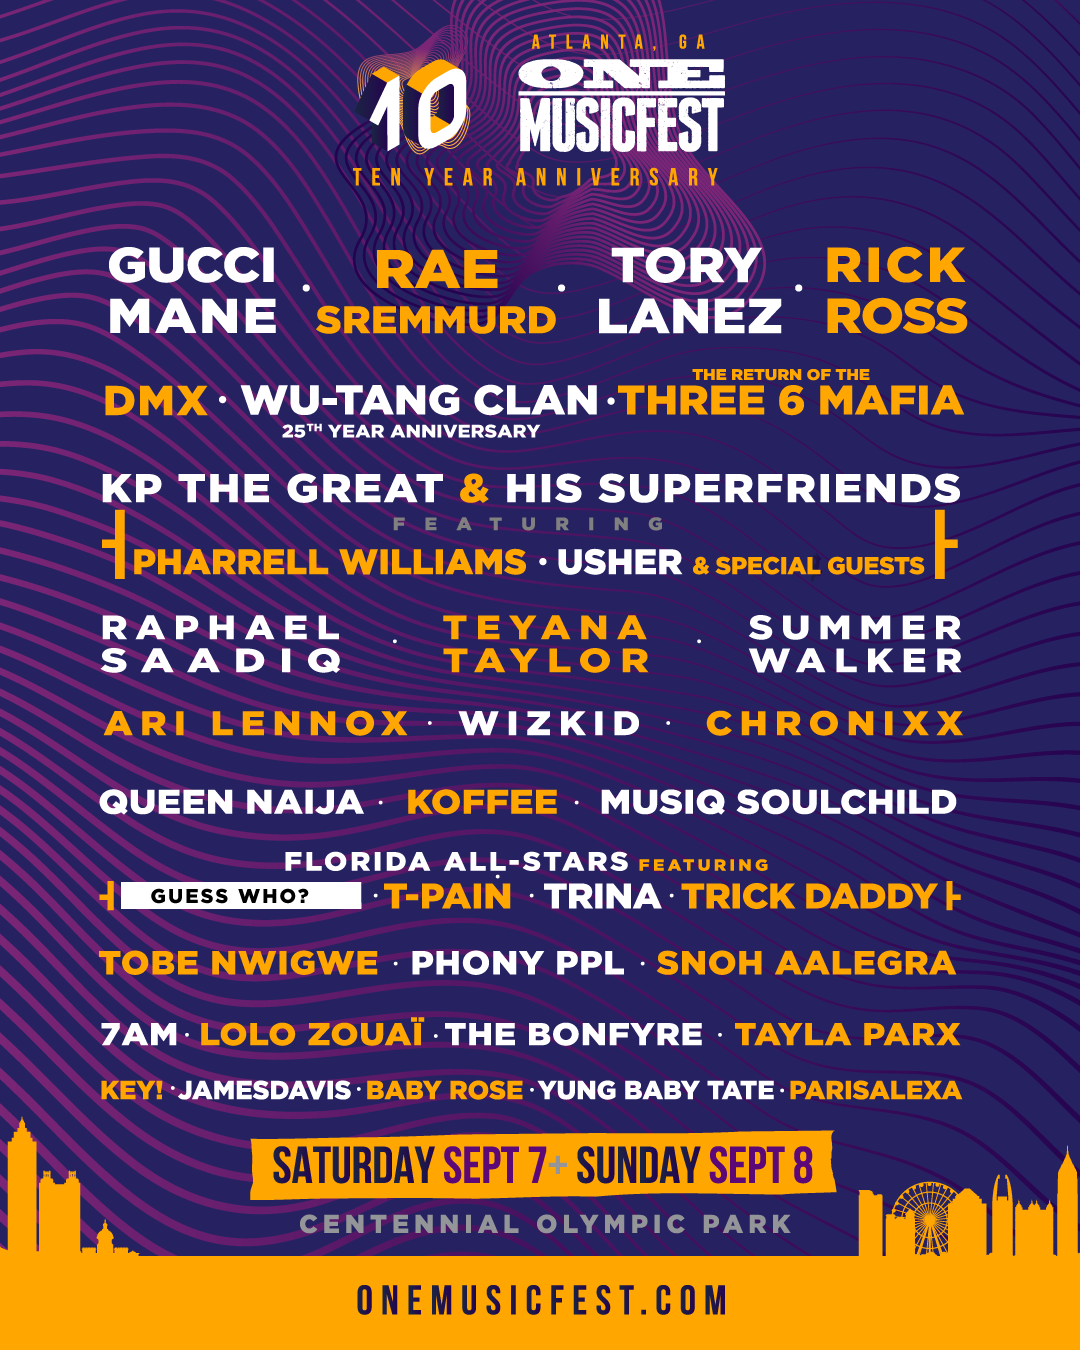 One MusicFest 2019 in Atlanta, GA Lineup Out now! WuTang Clan